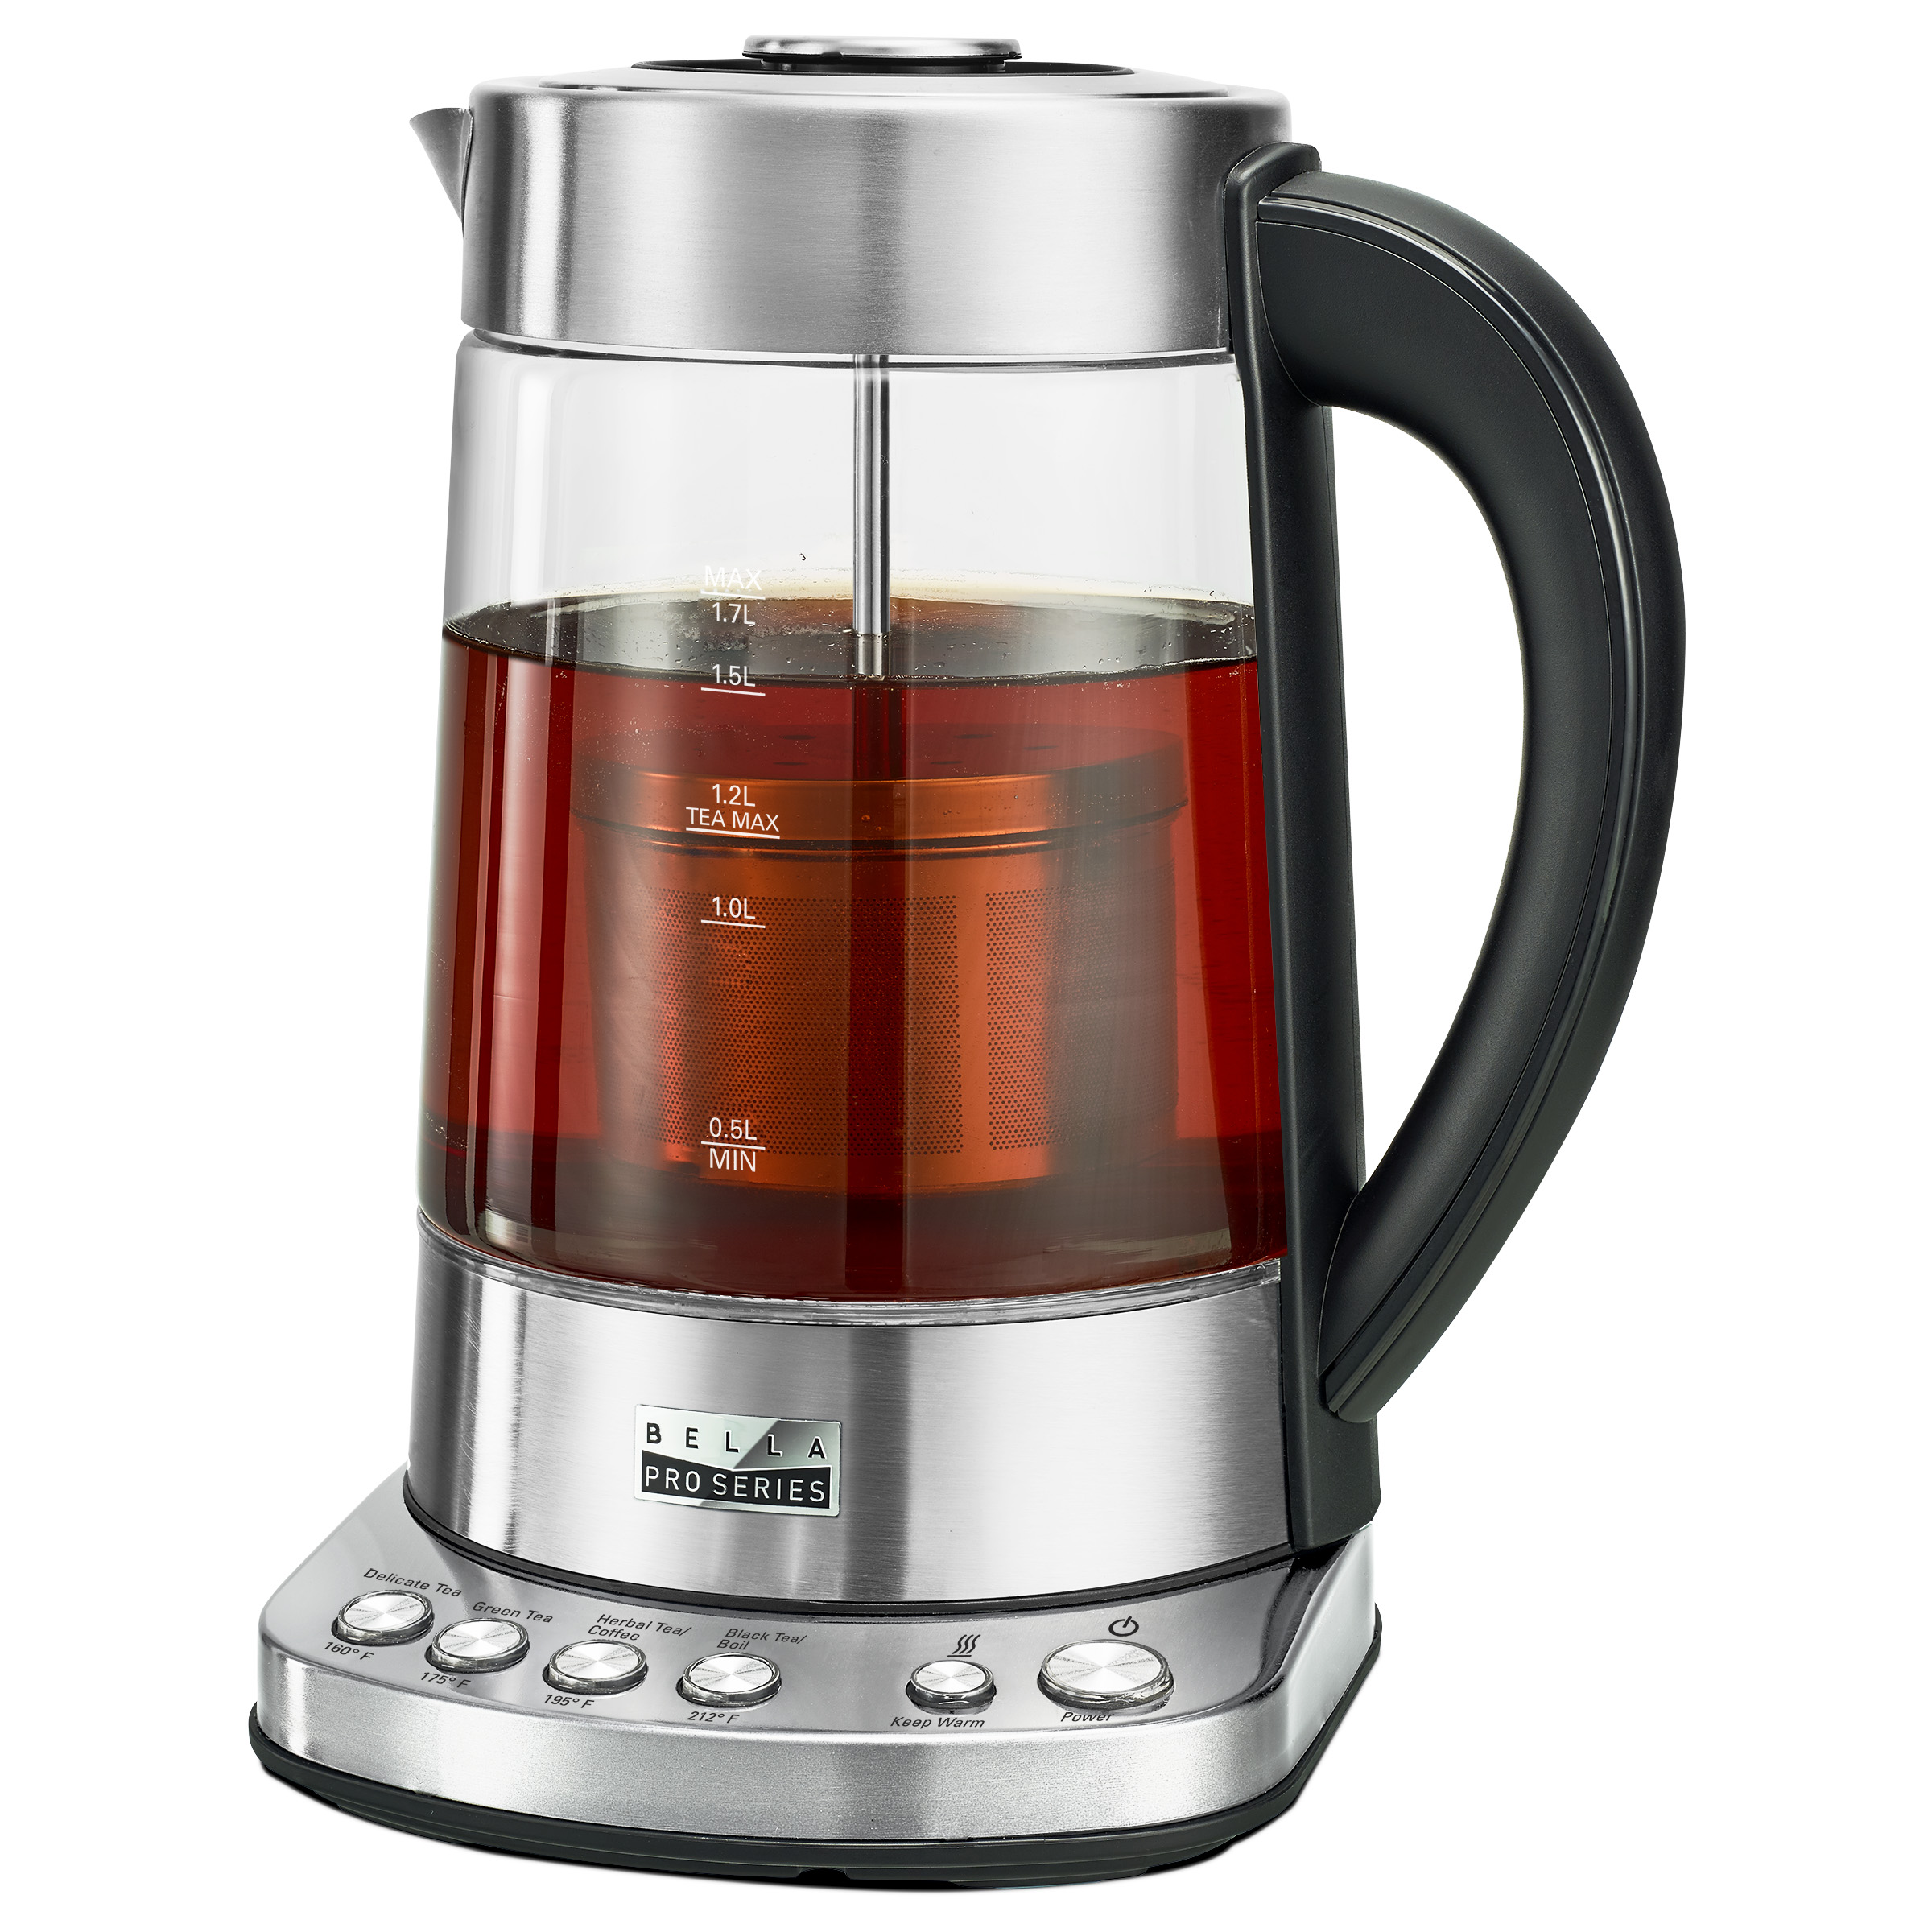 glass and stainless steel electric tea kettle steeping tea